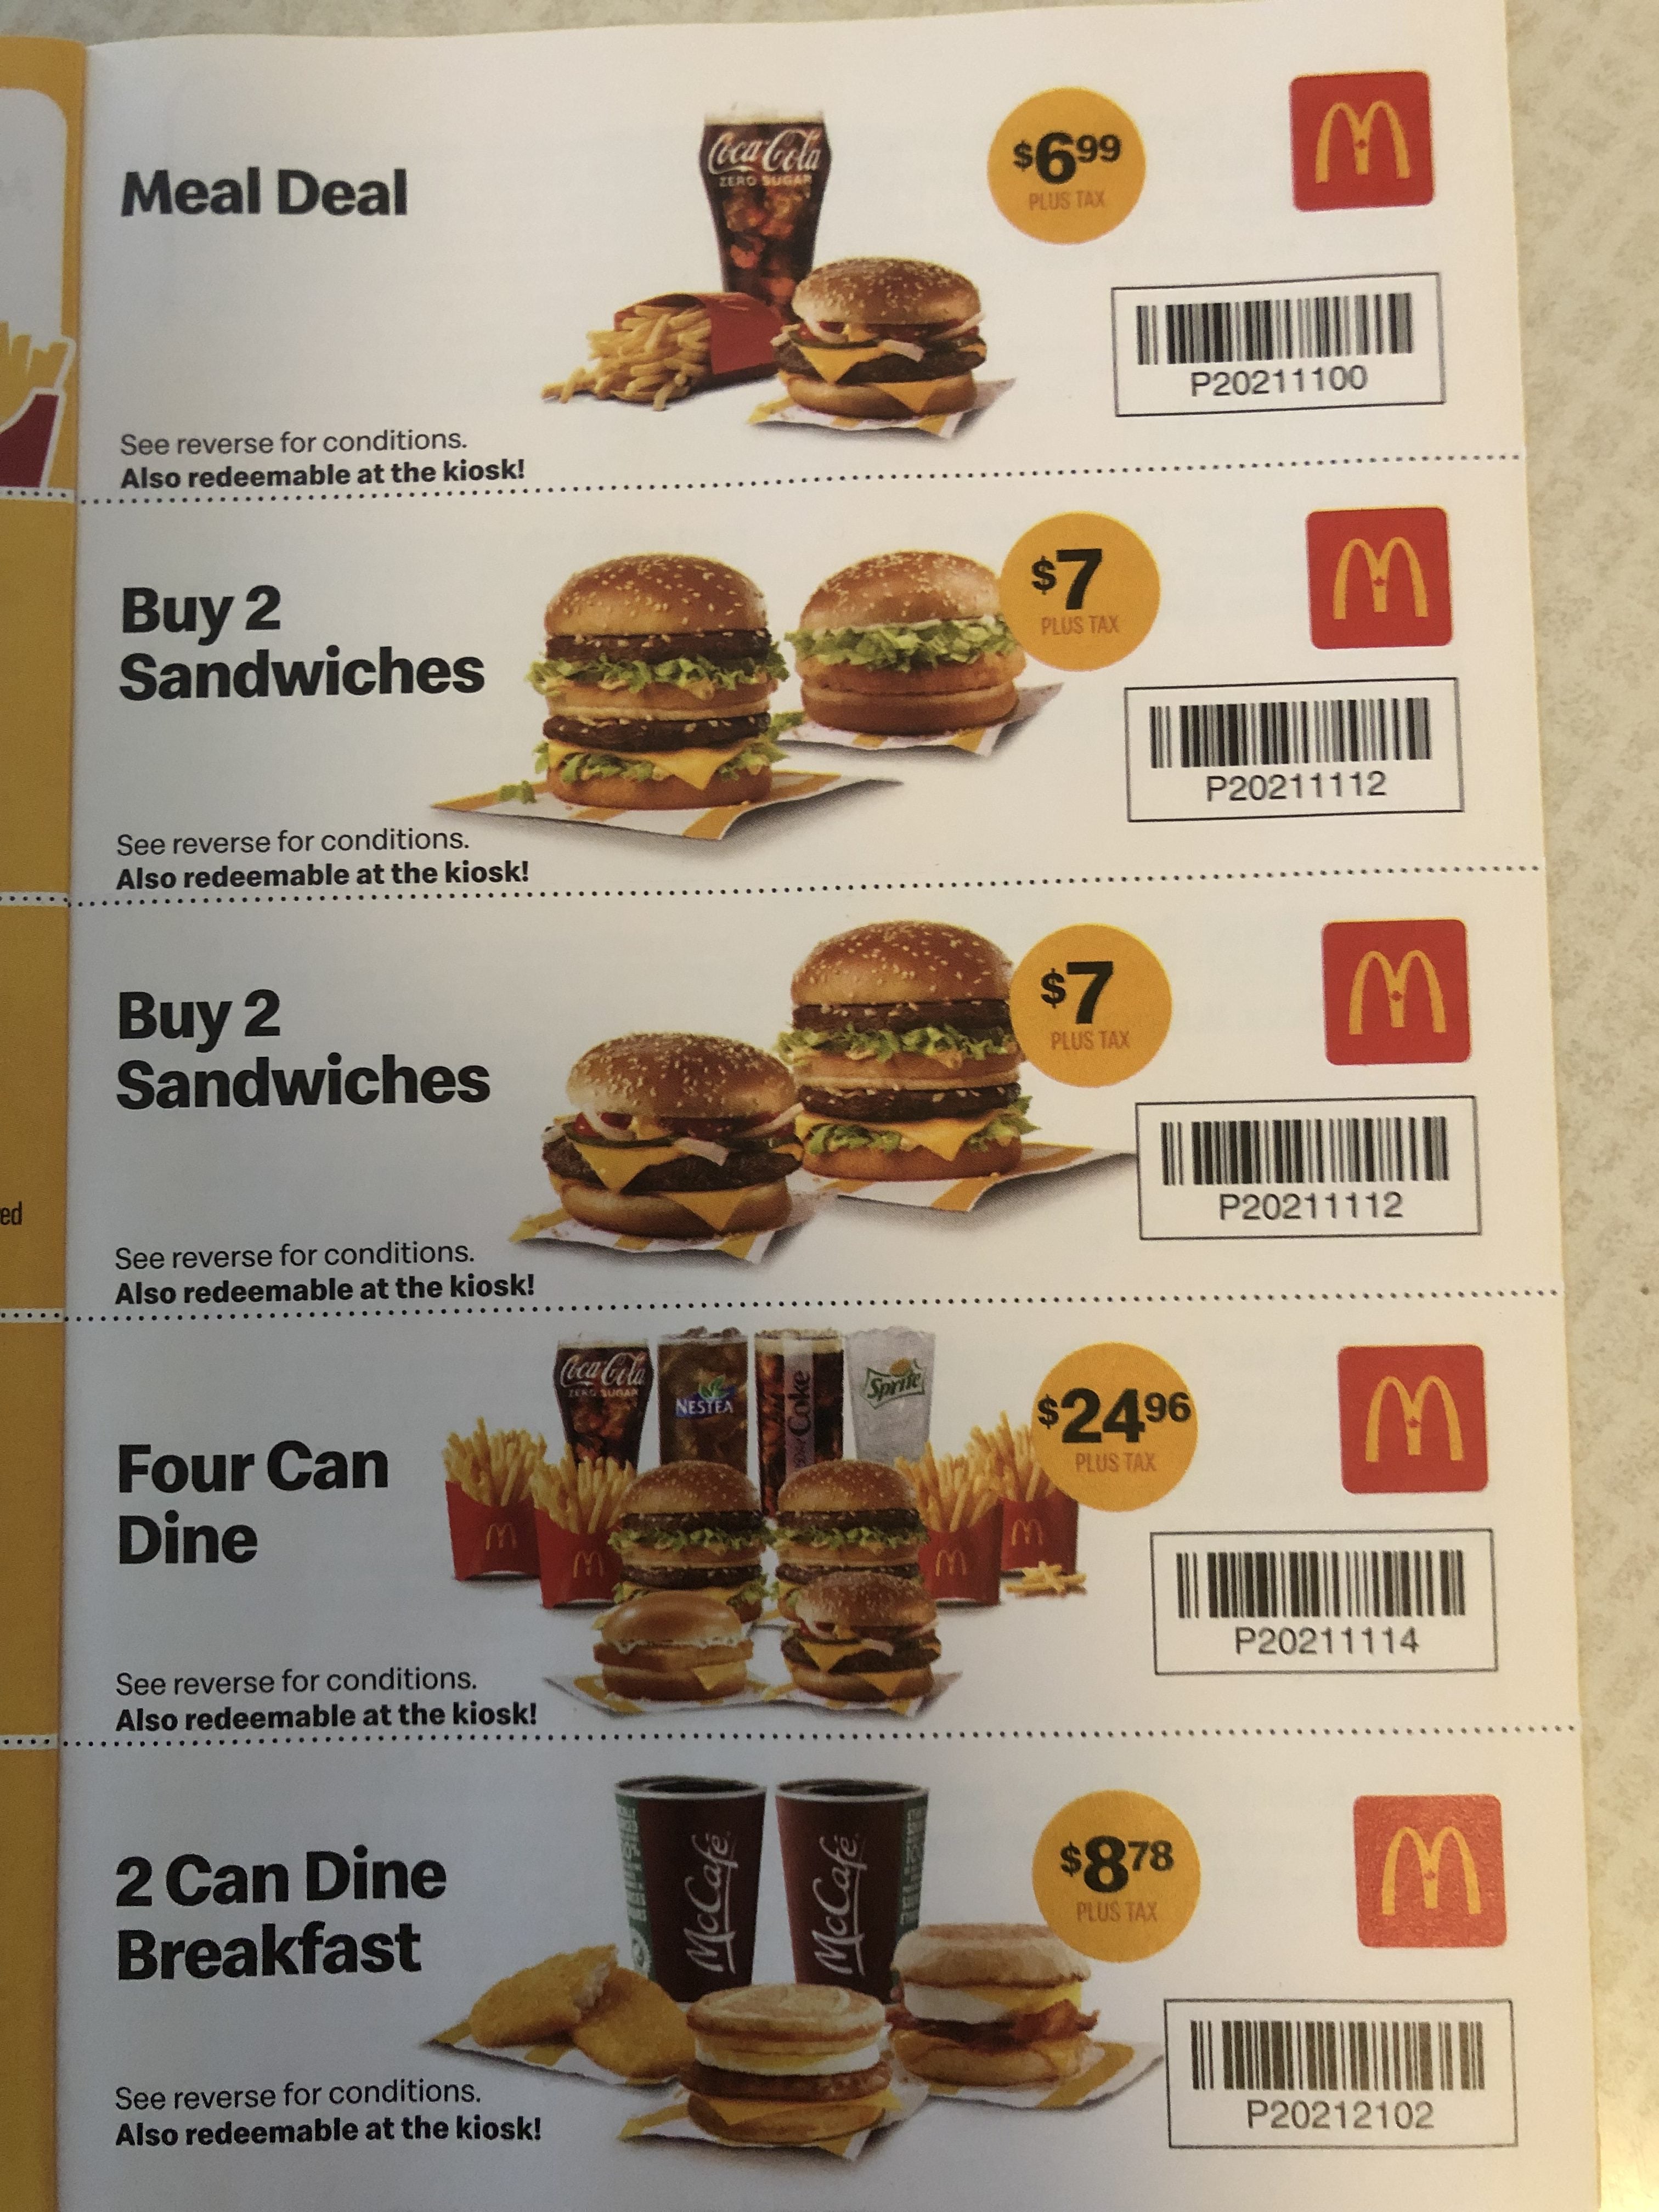 [McDonalds] New McDonald's mailer coupons are out Forums